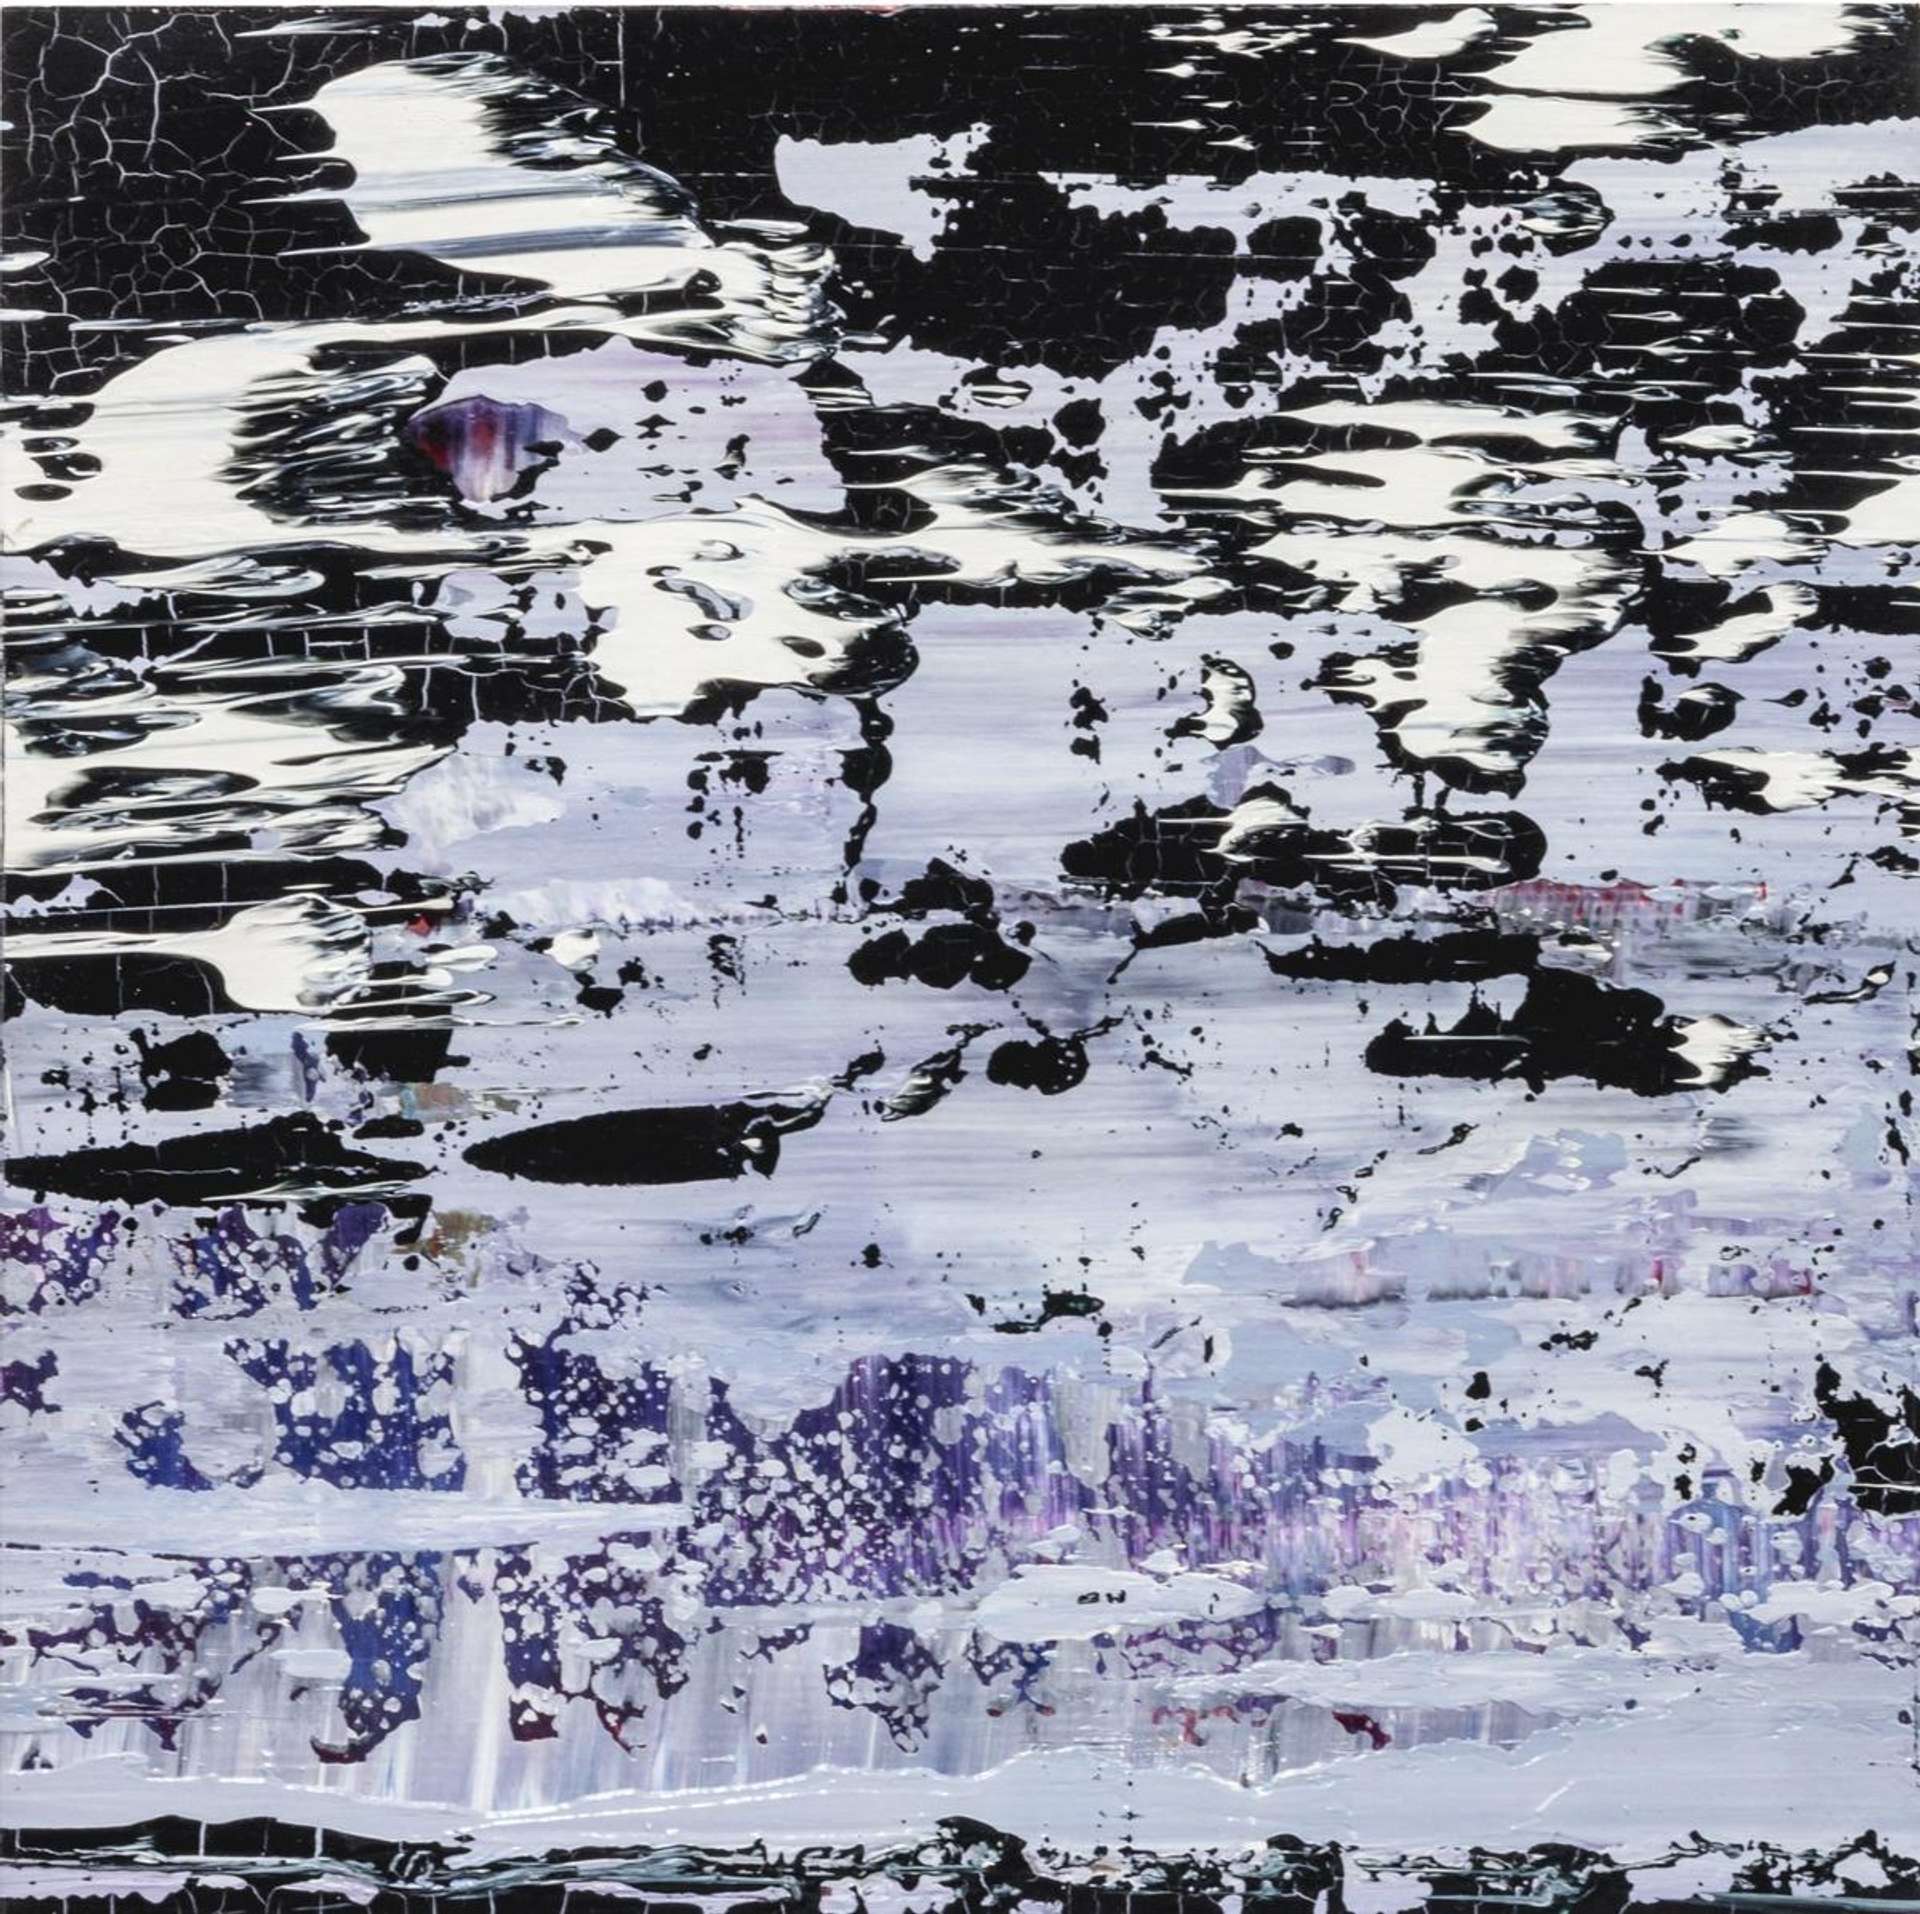 This abstract expressionist work by Gerhard Richter is composed of a lilac, black and white colour palette.